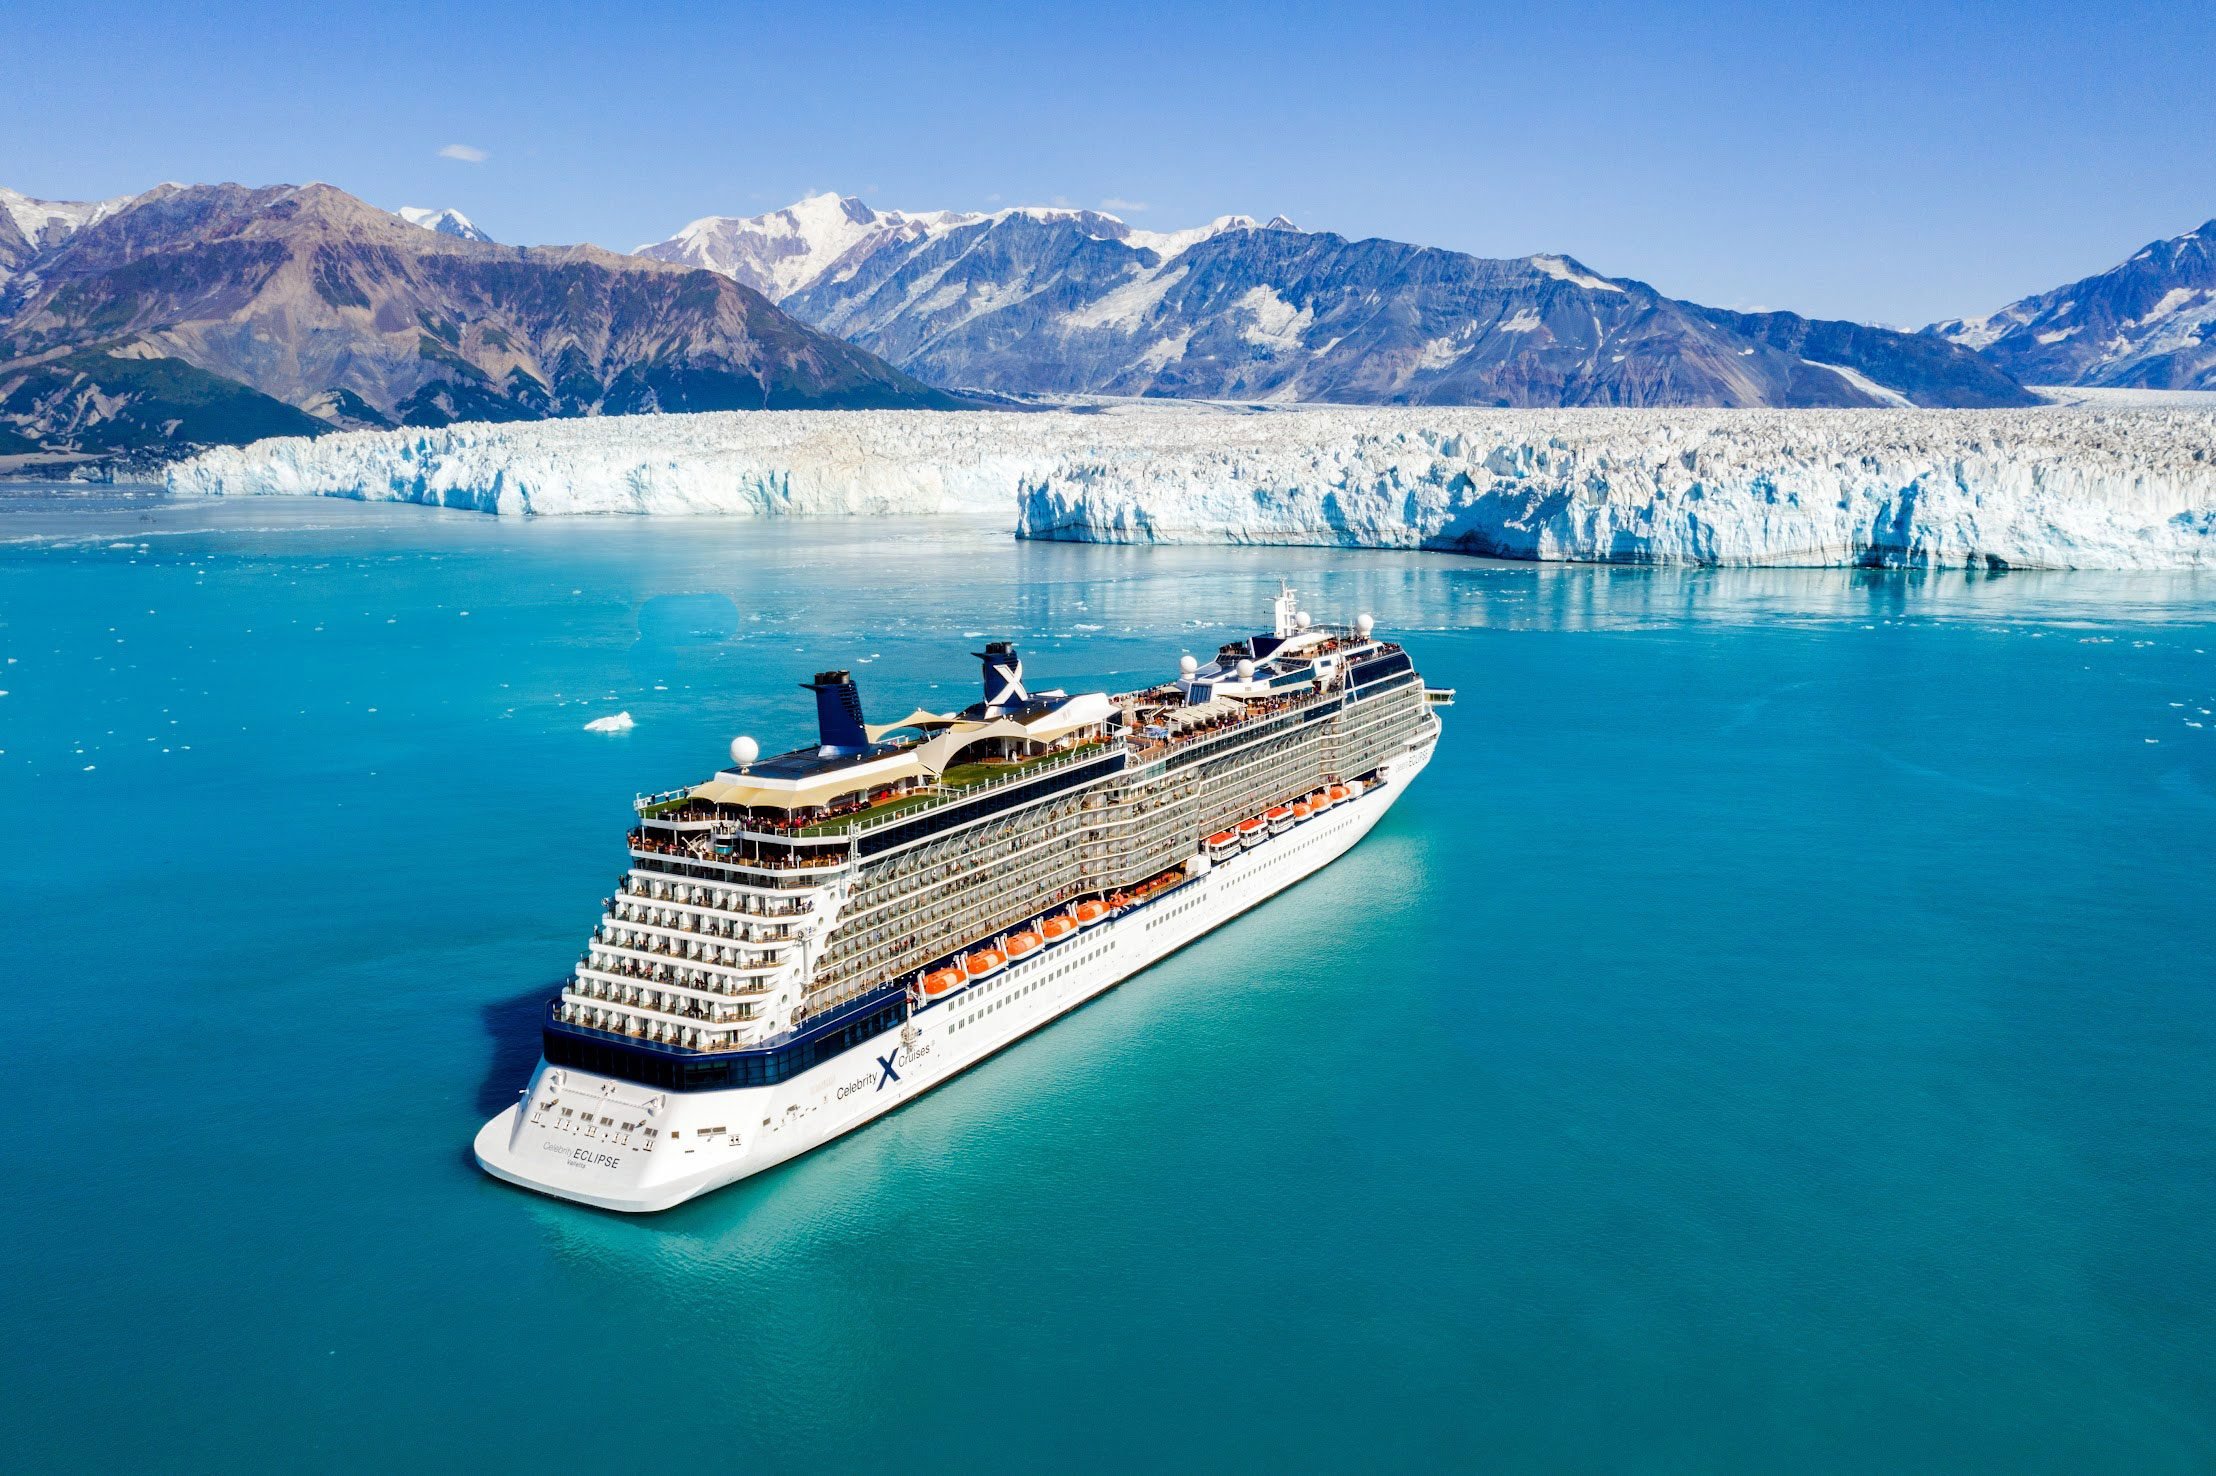 <p><a href="https://www.tripadvisor.com/Cruise_Review-d15691378-Reviews-Celebrity_Millennium" rel="noopener noreferrer">Celebrity</a> has 15 award-winning ships that take guests to more than 300 destinations in 79 countries on all seven continents, including the Caribbean, Alaska, Europe, South America, Asia, Australia and the South Pacific, Galapagos and Canada.</p> <p><strong>Cost: </strong>Cruises on Celebrity start as low as $288 per person.</p> <p><strong>Specials to watch for: </strong>Celebrity offers various specials, like a spring sale that takes 75% off a second guest's fare and saves up to $800 per stateroom with up to $800 to spend on board. Also look for promotions like Alaska weekend flash sales (second guest sails for free plus $250 onboard credit) and 20% off Galapagos vacations (round-trip airfare included).</p> <p><strong>Other savings to consider: </strong>Choose the <a href="https://www.rd.com/list/best-all-inclusive-cruises/" rel="noopener noreferrer">all-inclusive options</a> of prepackaged drinks, Wi-Fi and tips to save up to 45% on these individual items.</p> <p><strong>Affordable cruises: </strong>We've seen 7-night Alaska cruises for as low as $299 per person.</p> <p class="listicle-page__cta-button-shop"><a class="shop-btn" href="https://www.tripadvisor.com/Cruise_Review-d15691378-Reviews-Celebrity_Millennium">Book Now</a></p>